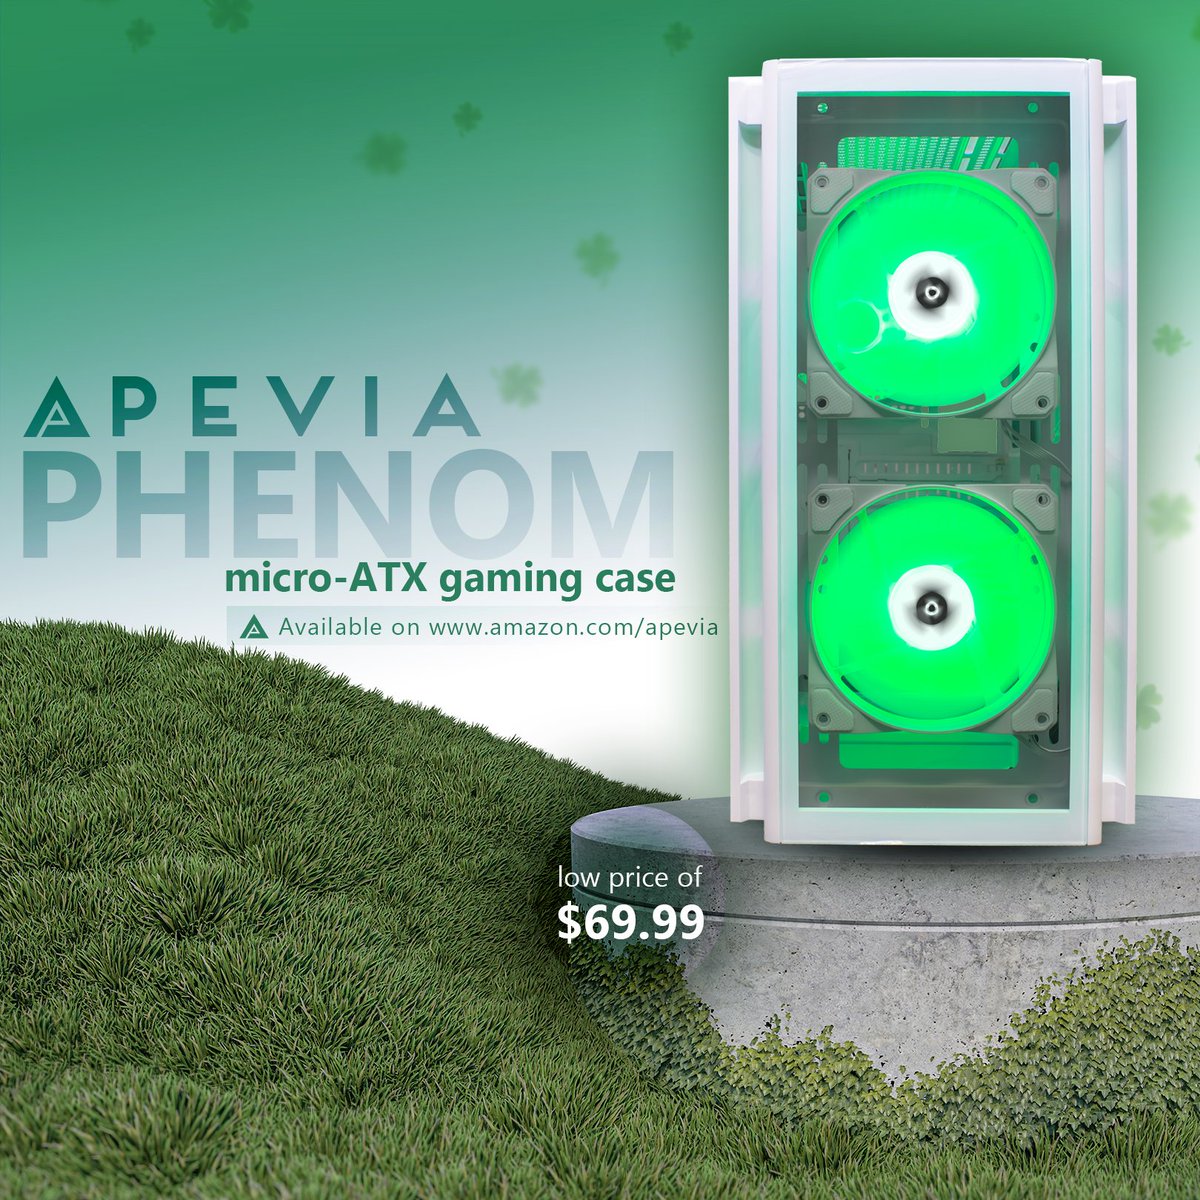 Feeling lucky with the Apevia Phenom by your side? 🍀 
Reply below and show off your green Apevia setup for St. Patrick's Day!💚
↩️
#greensetup #gamingsetup #greenapeviabuild #ApeviaCommunity #Apevia
#greeninspired